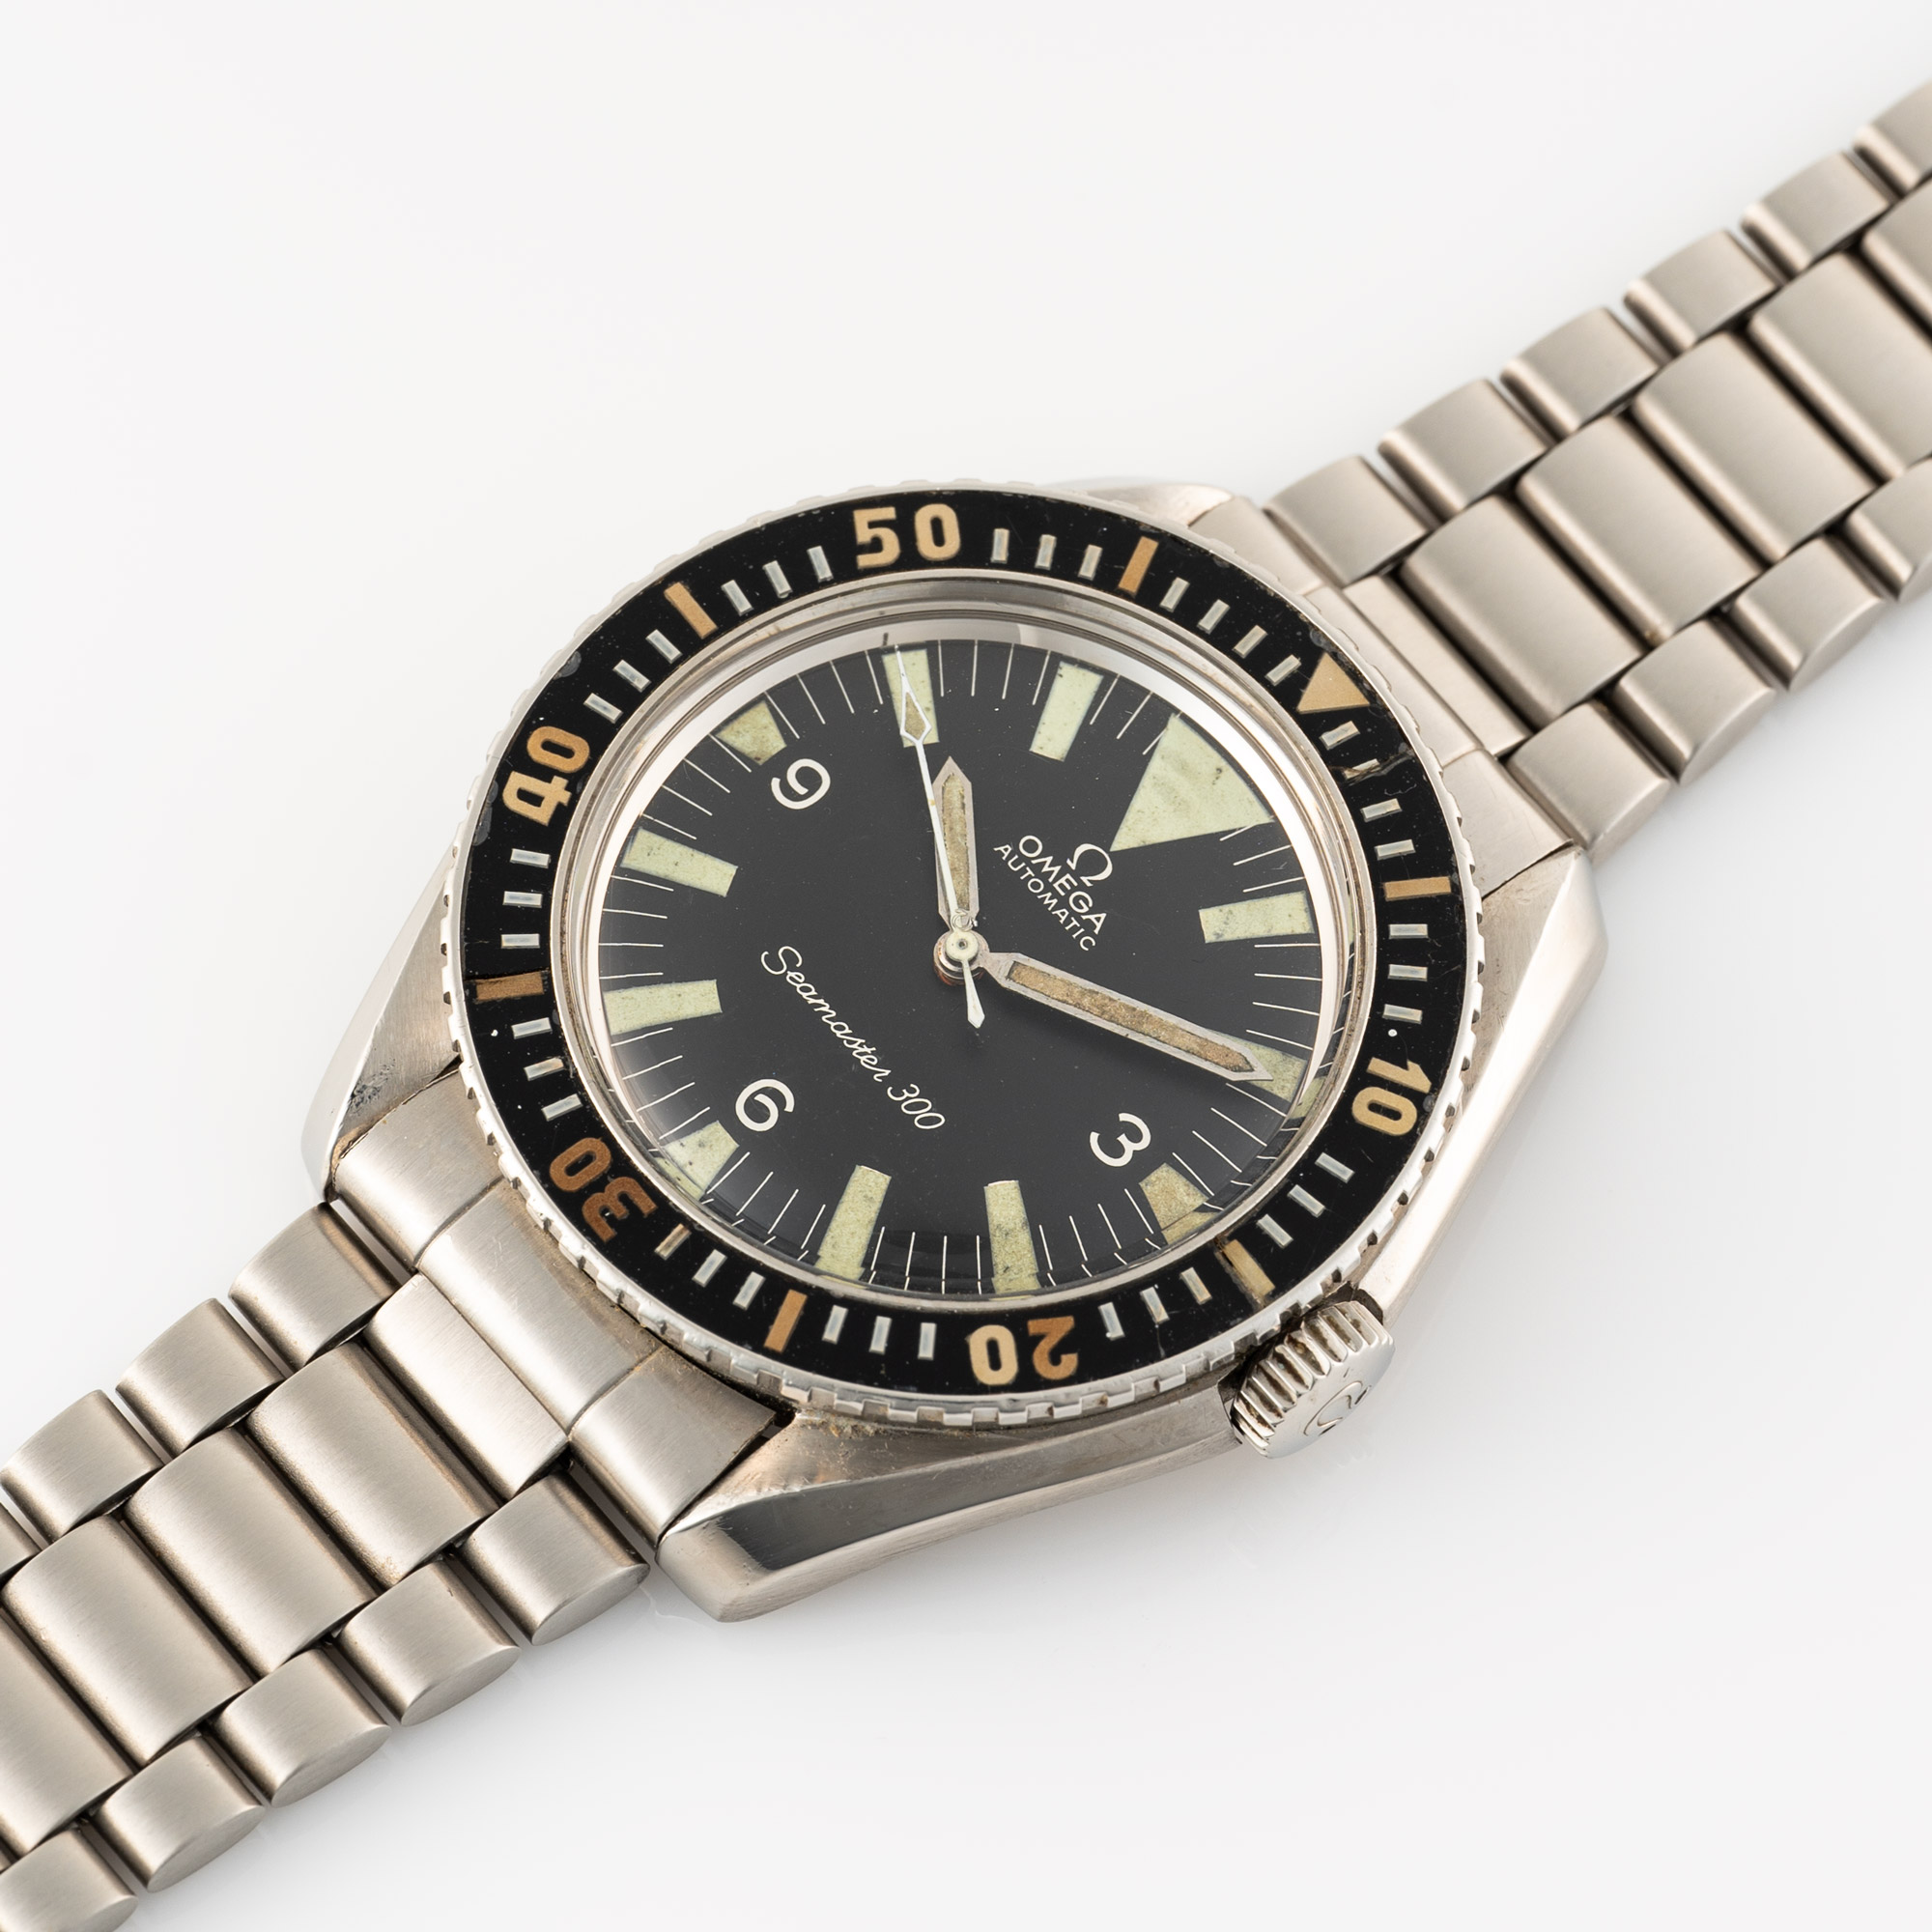 A GENTLEMAN'S SIZE STAINLESS STEEL OMEGA SEAMASTER 300 DIVERS BRACELET WATCH CIRCA 1965, REF. 165. - Image 4 of 10